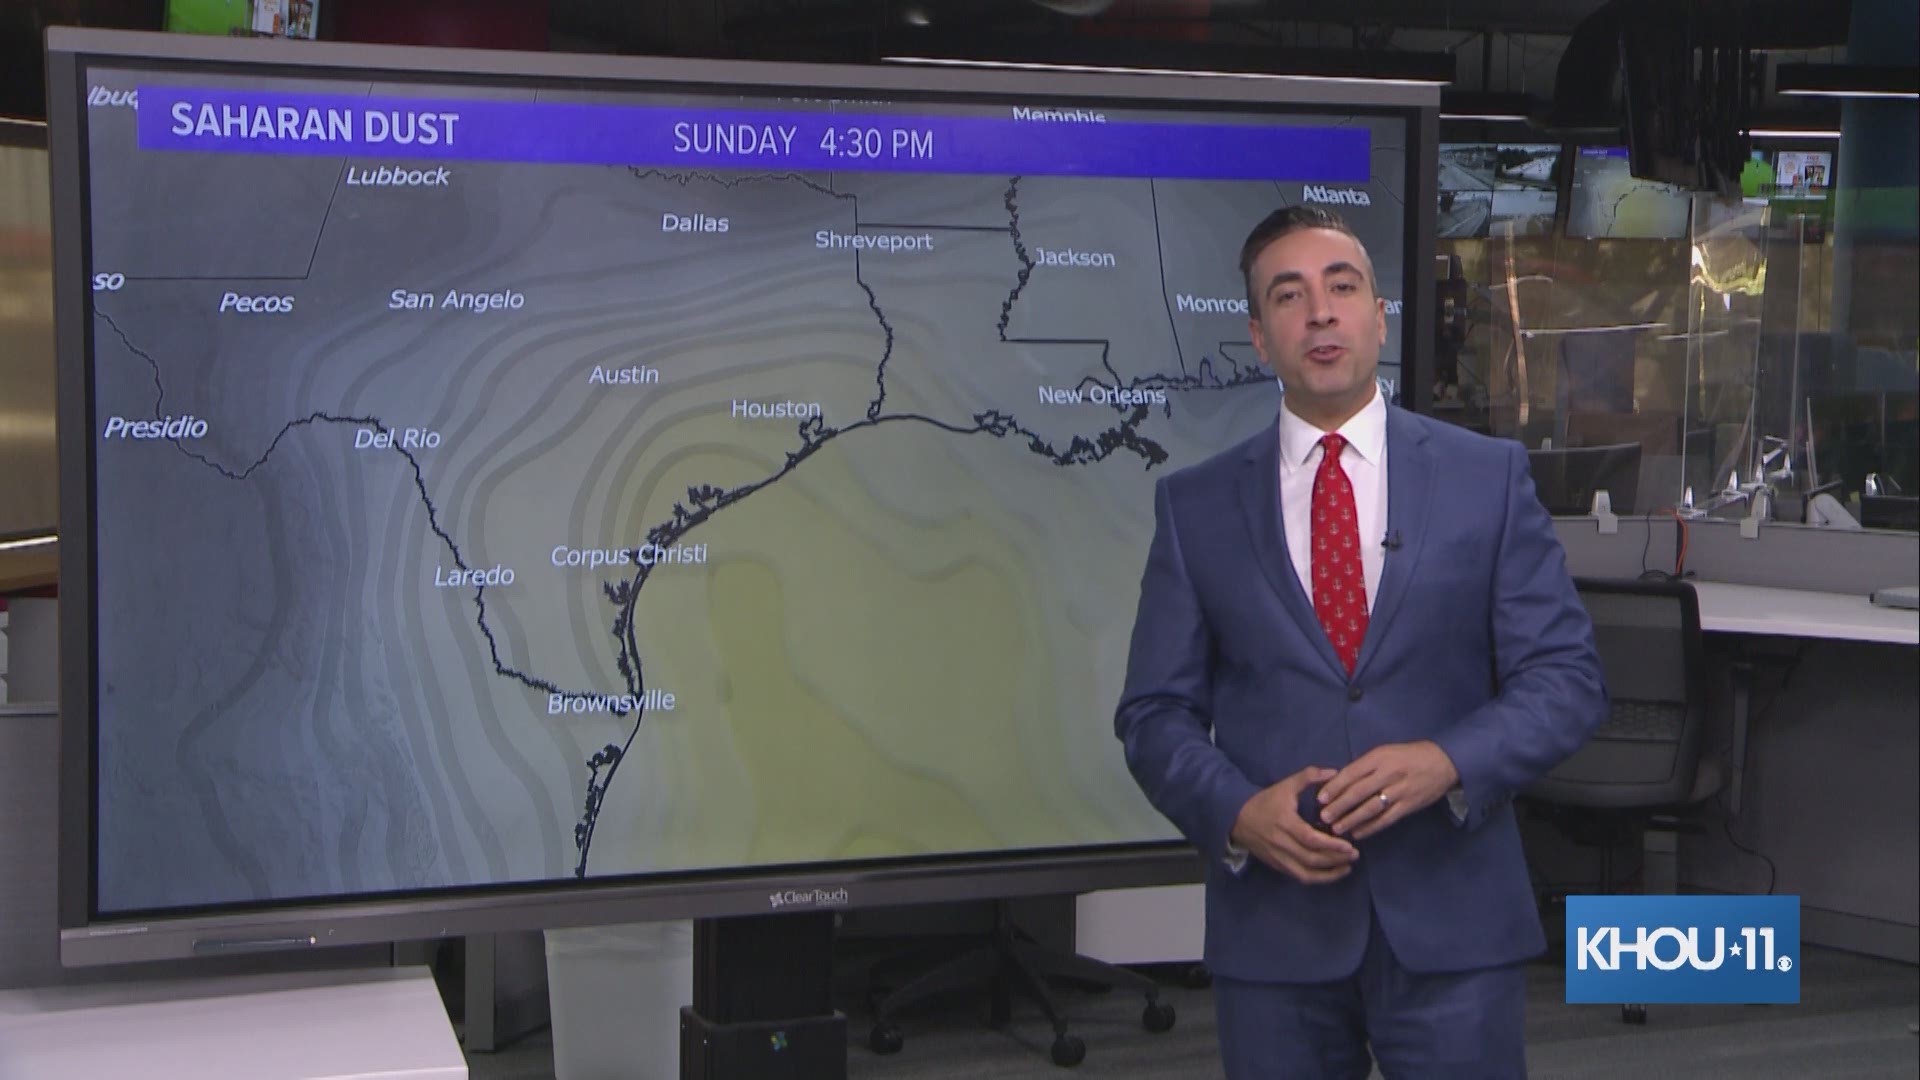 KHOU 11 Meteorologist Tim Pandajis tells us everything we need to know about Saharan dust. Where it comes from? How it get here? And what it means for Texas.